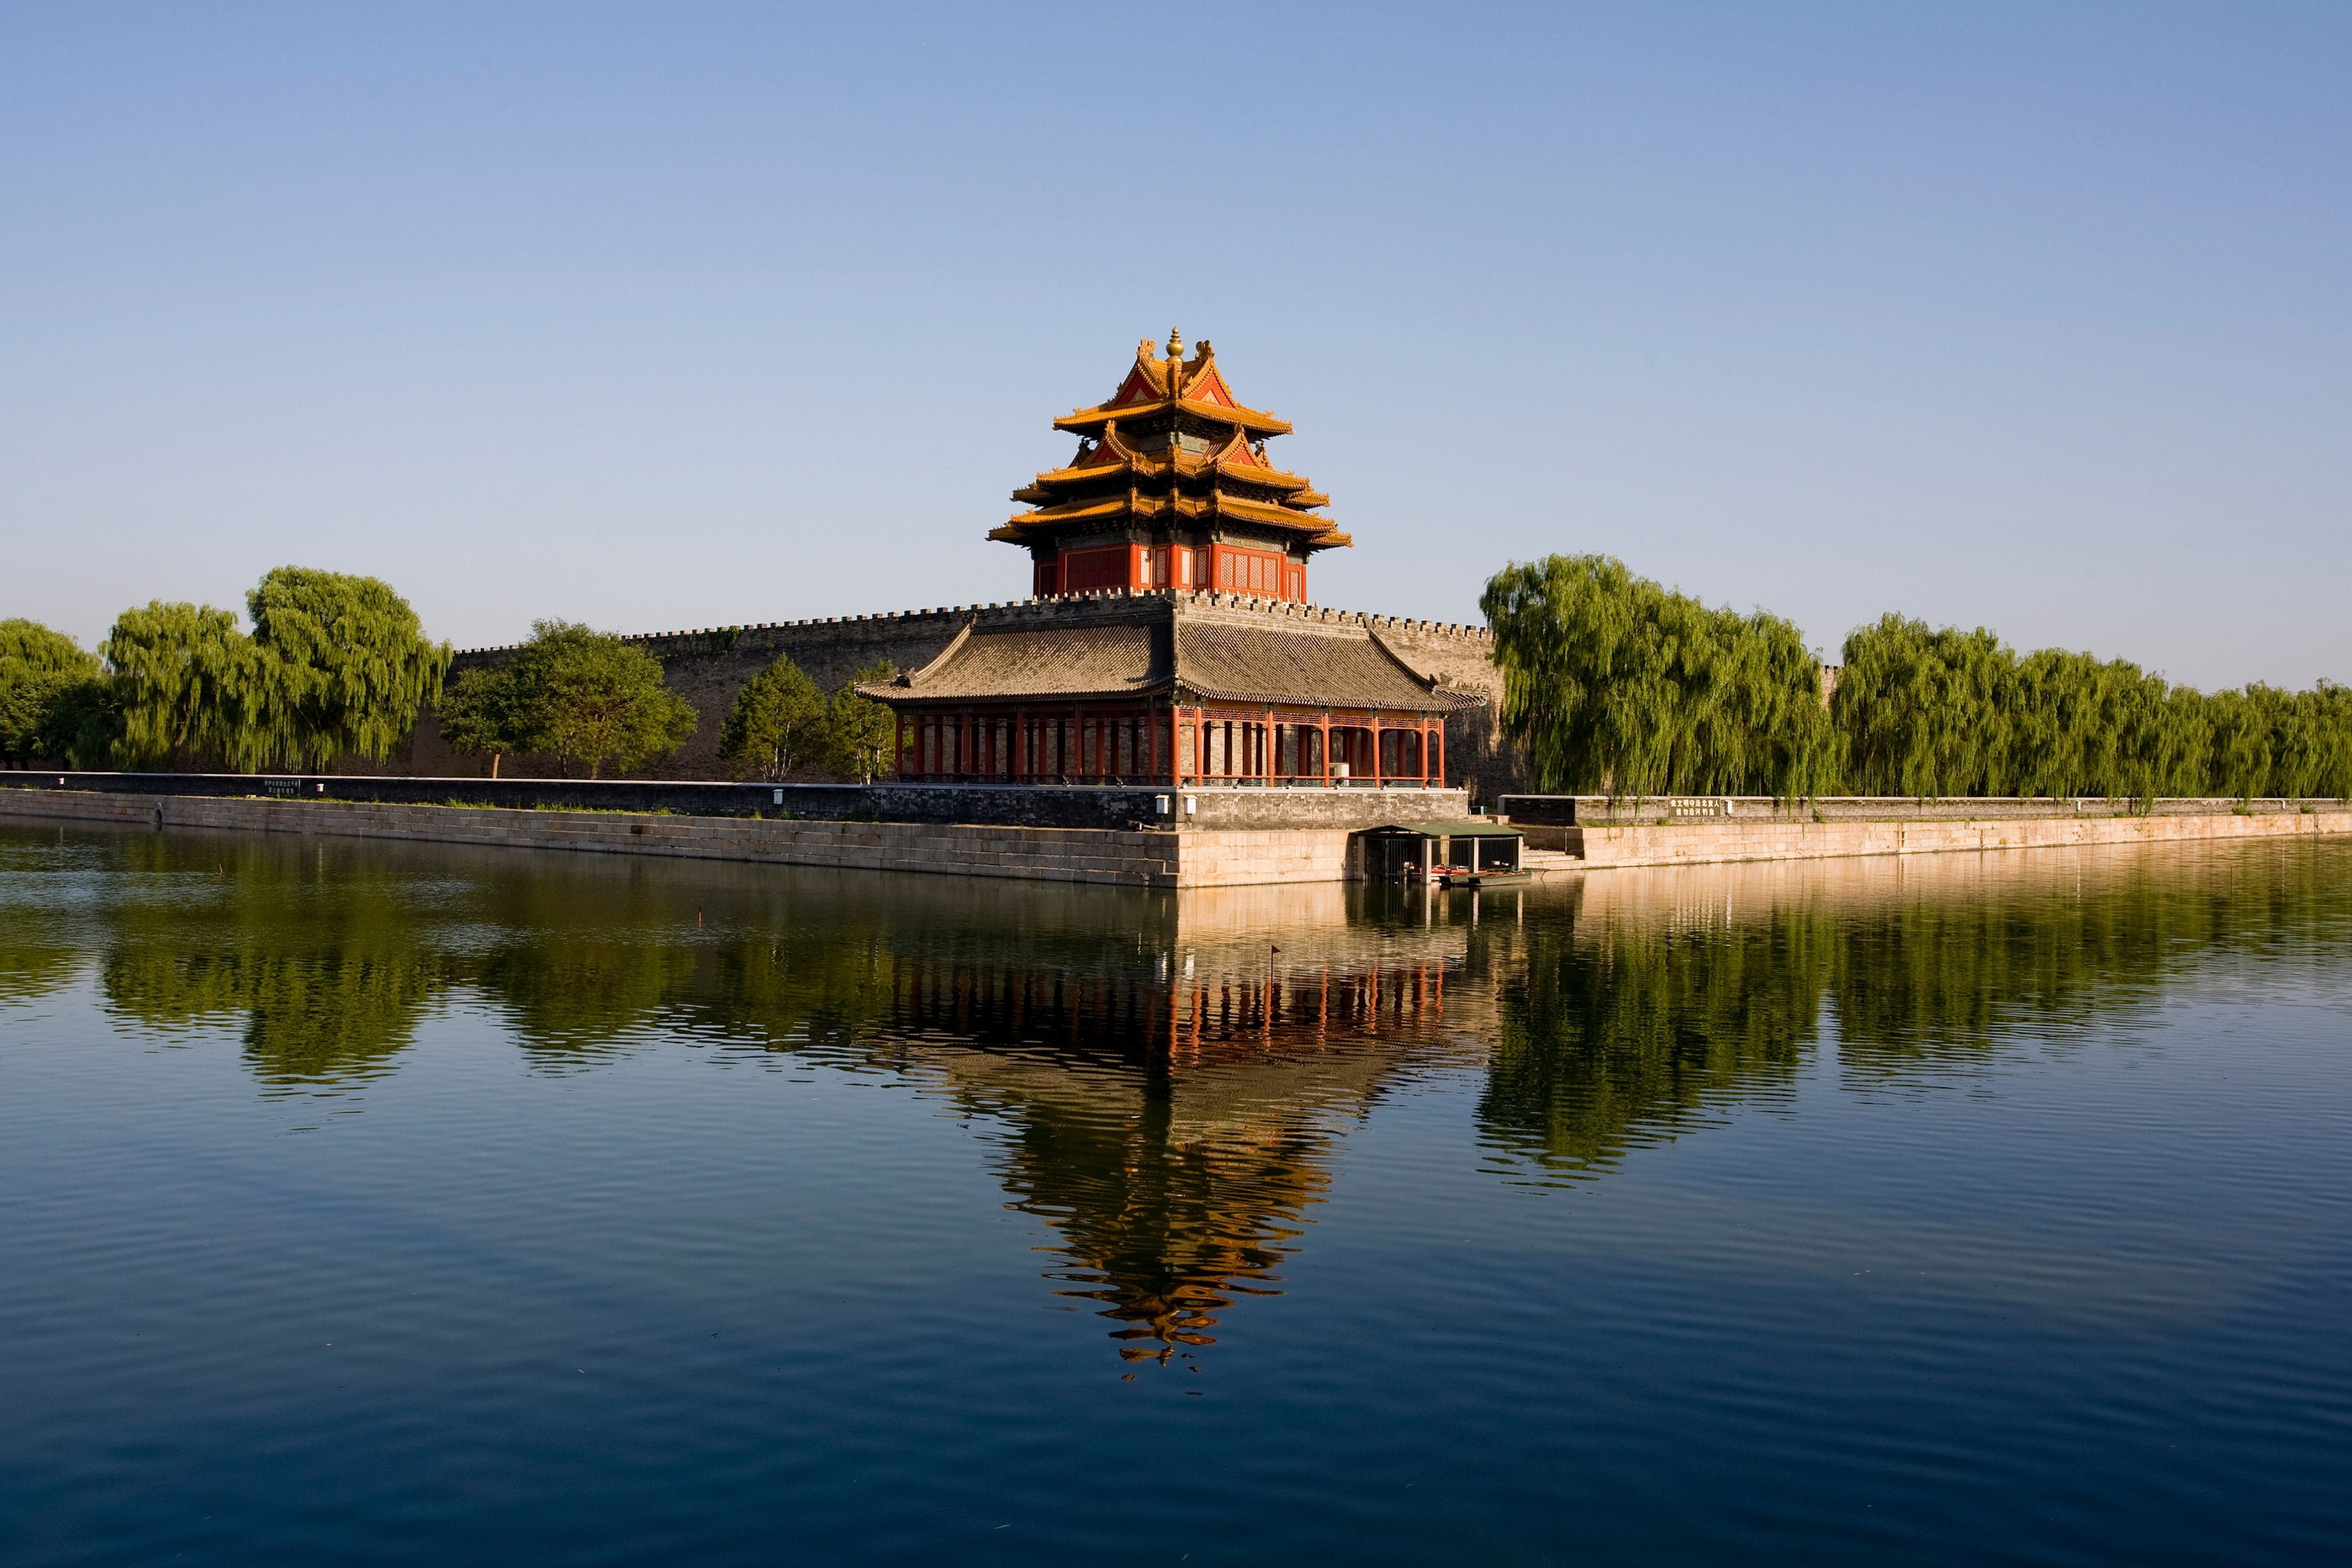 View of the Forbidden City from across Taiye Lake